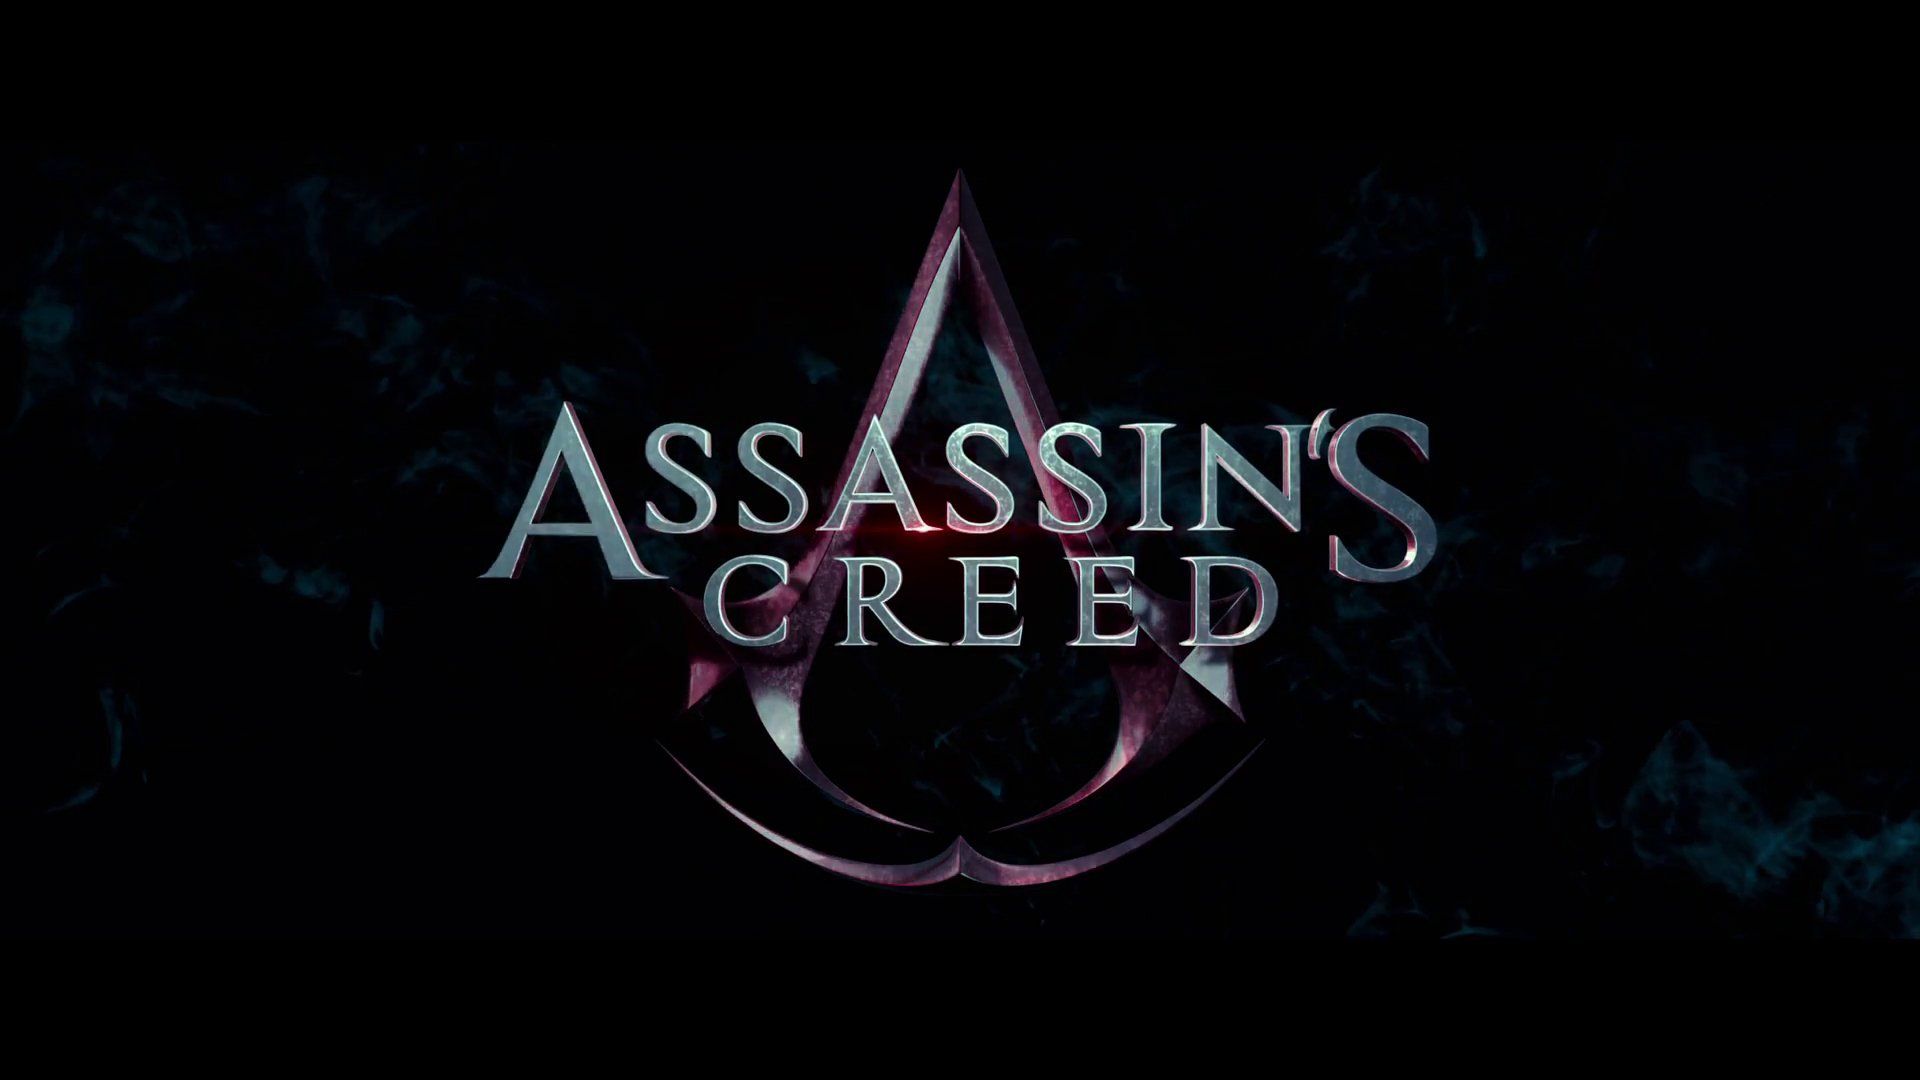 Assassin's Creed Logo HD Wallpaper. Background Imagex1080